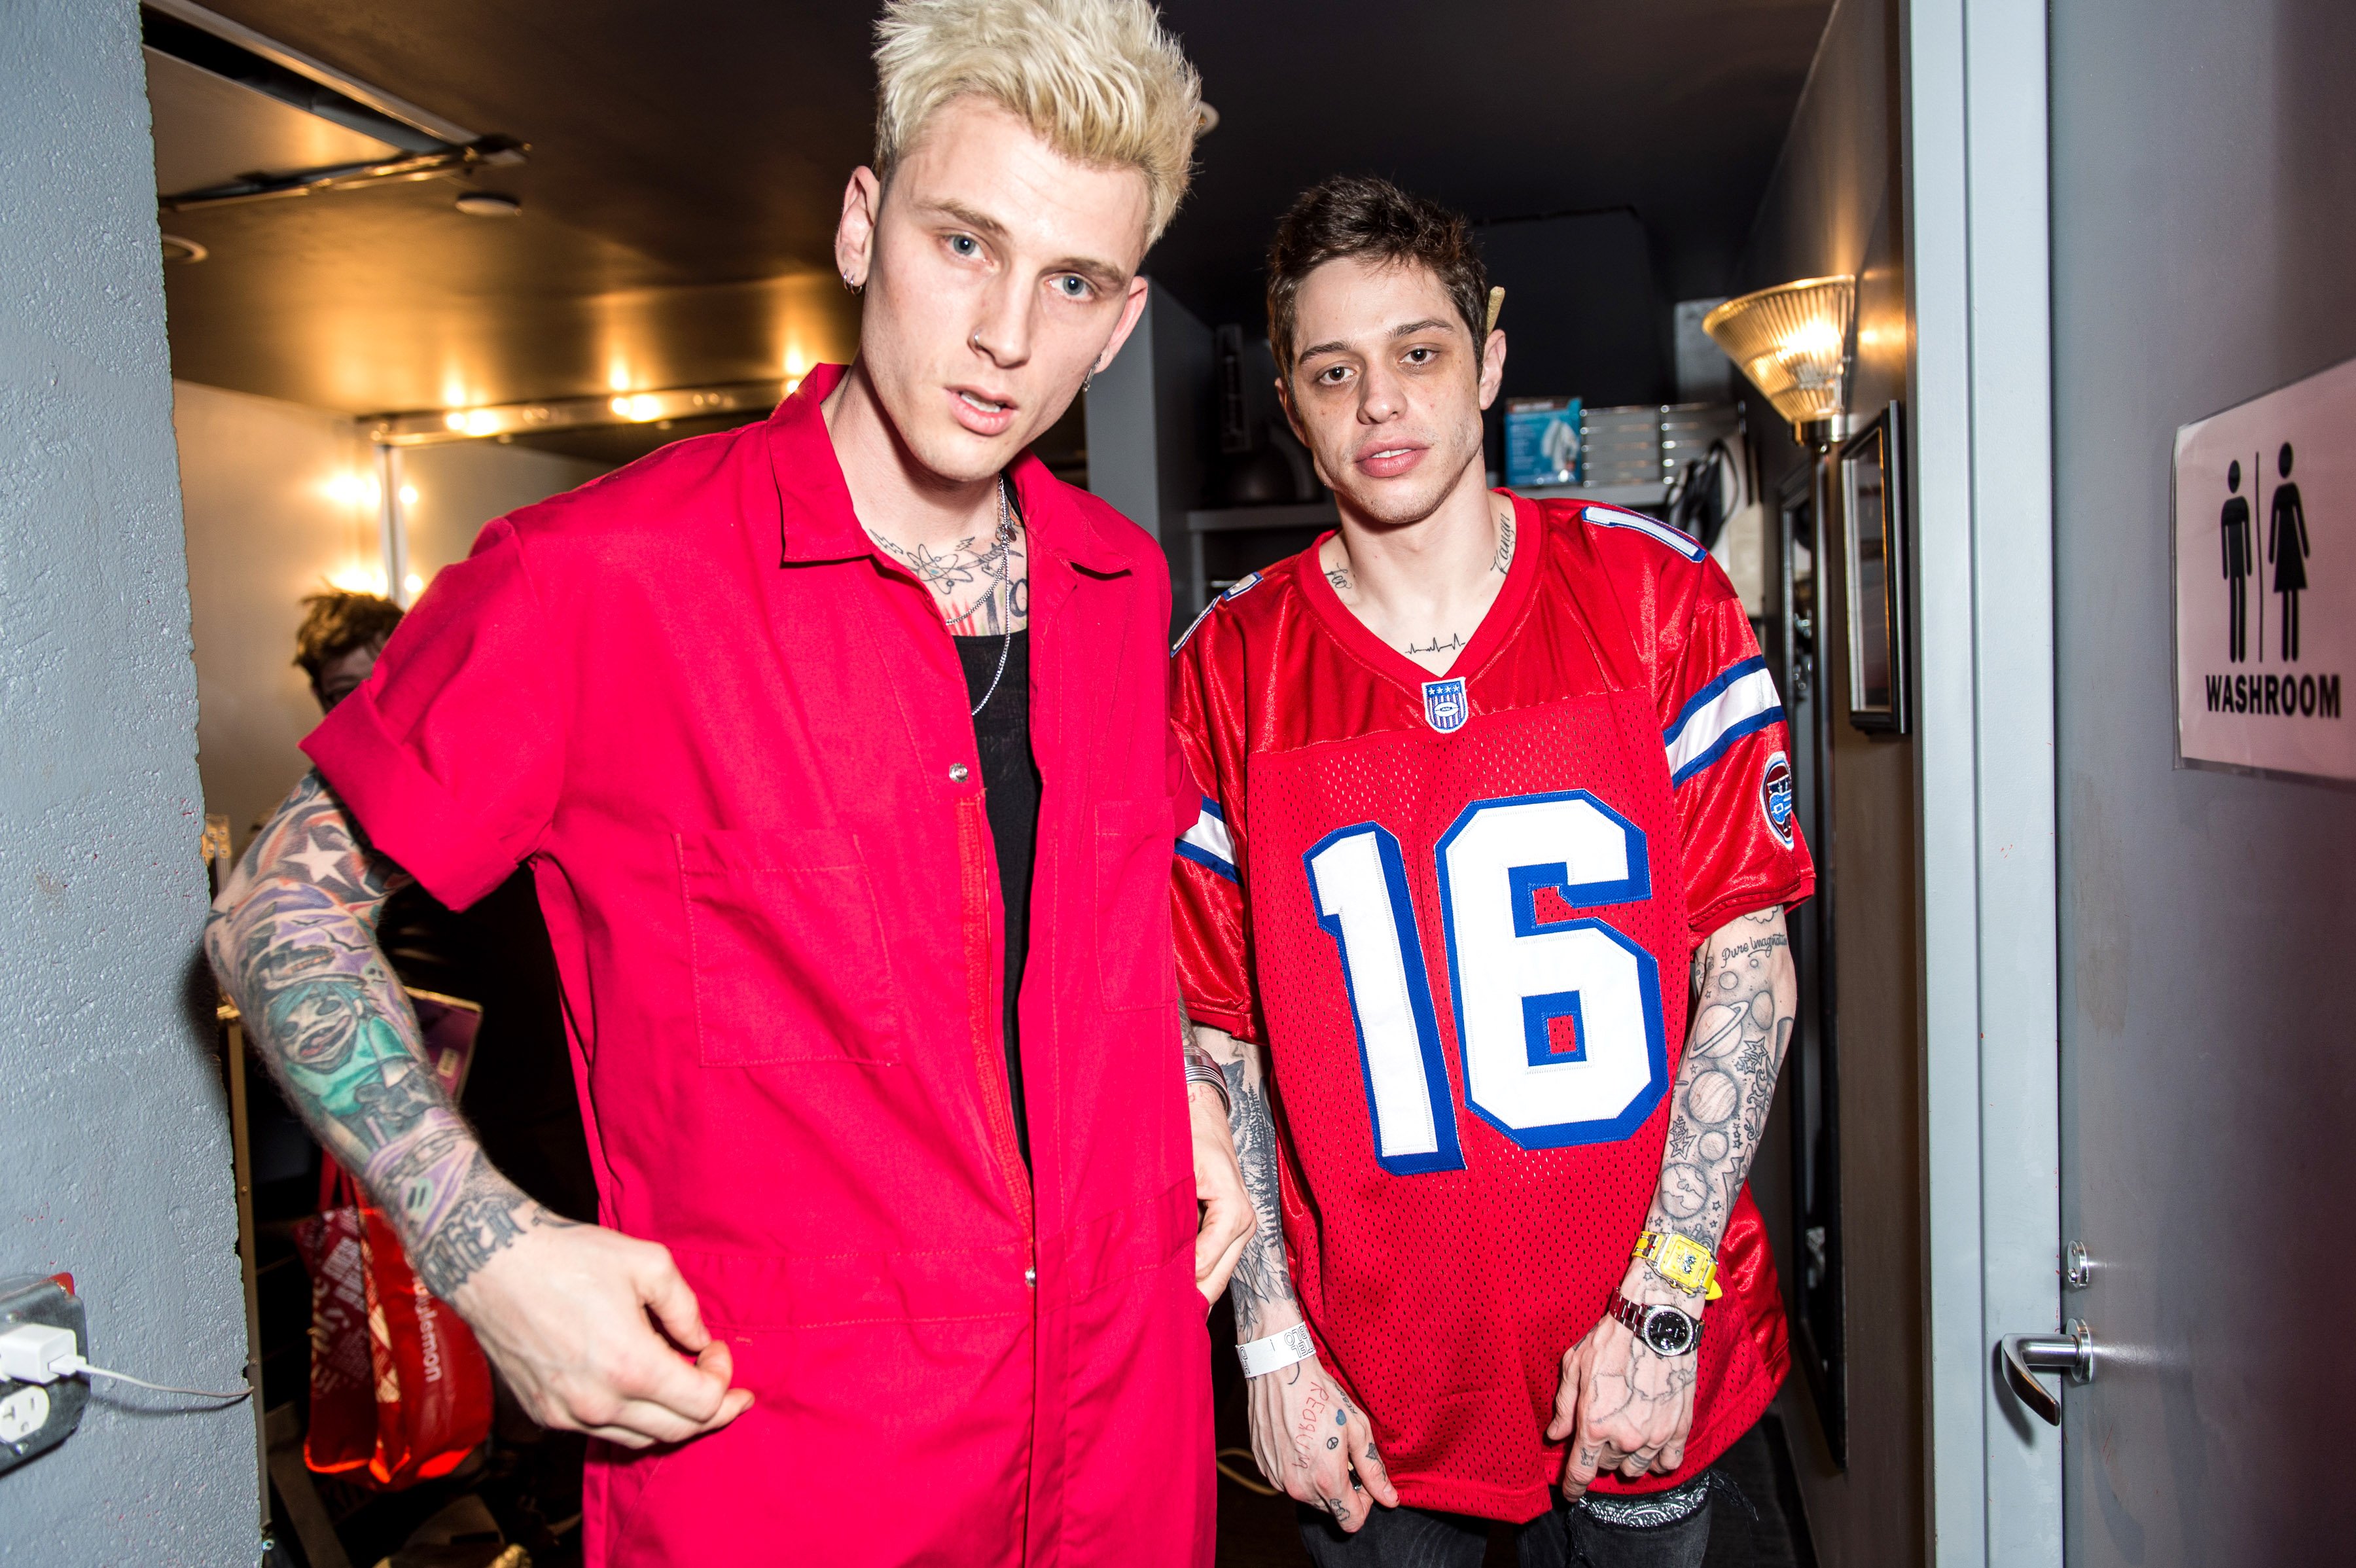 Machine Gun Kelly and Pete Davidson stand in a hallway outside a bathroom door while wearing red outfits.